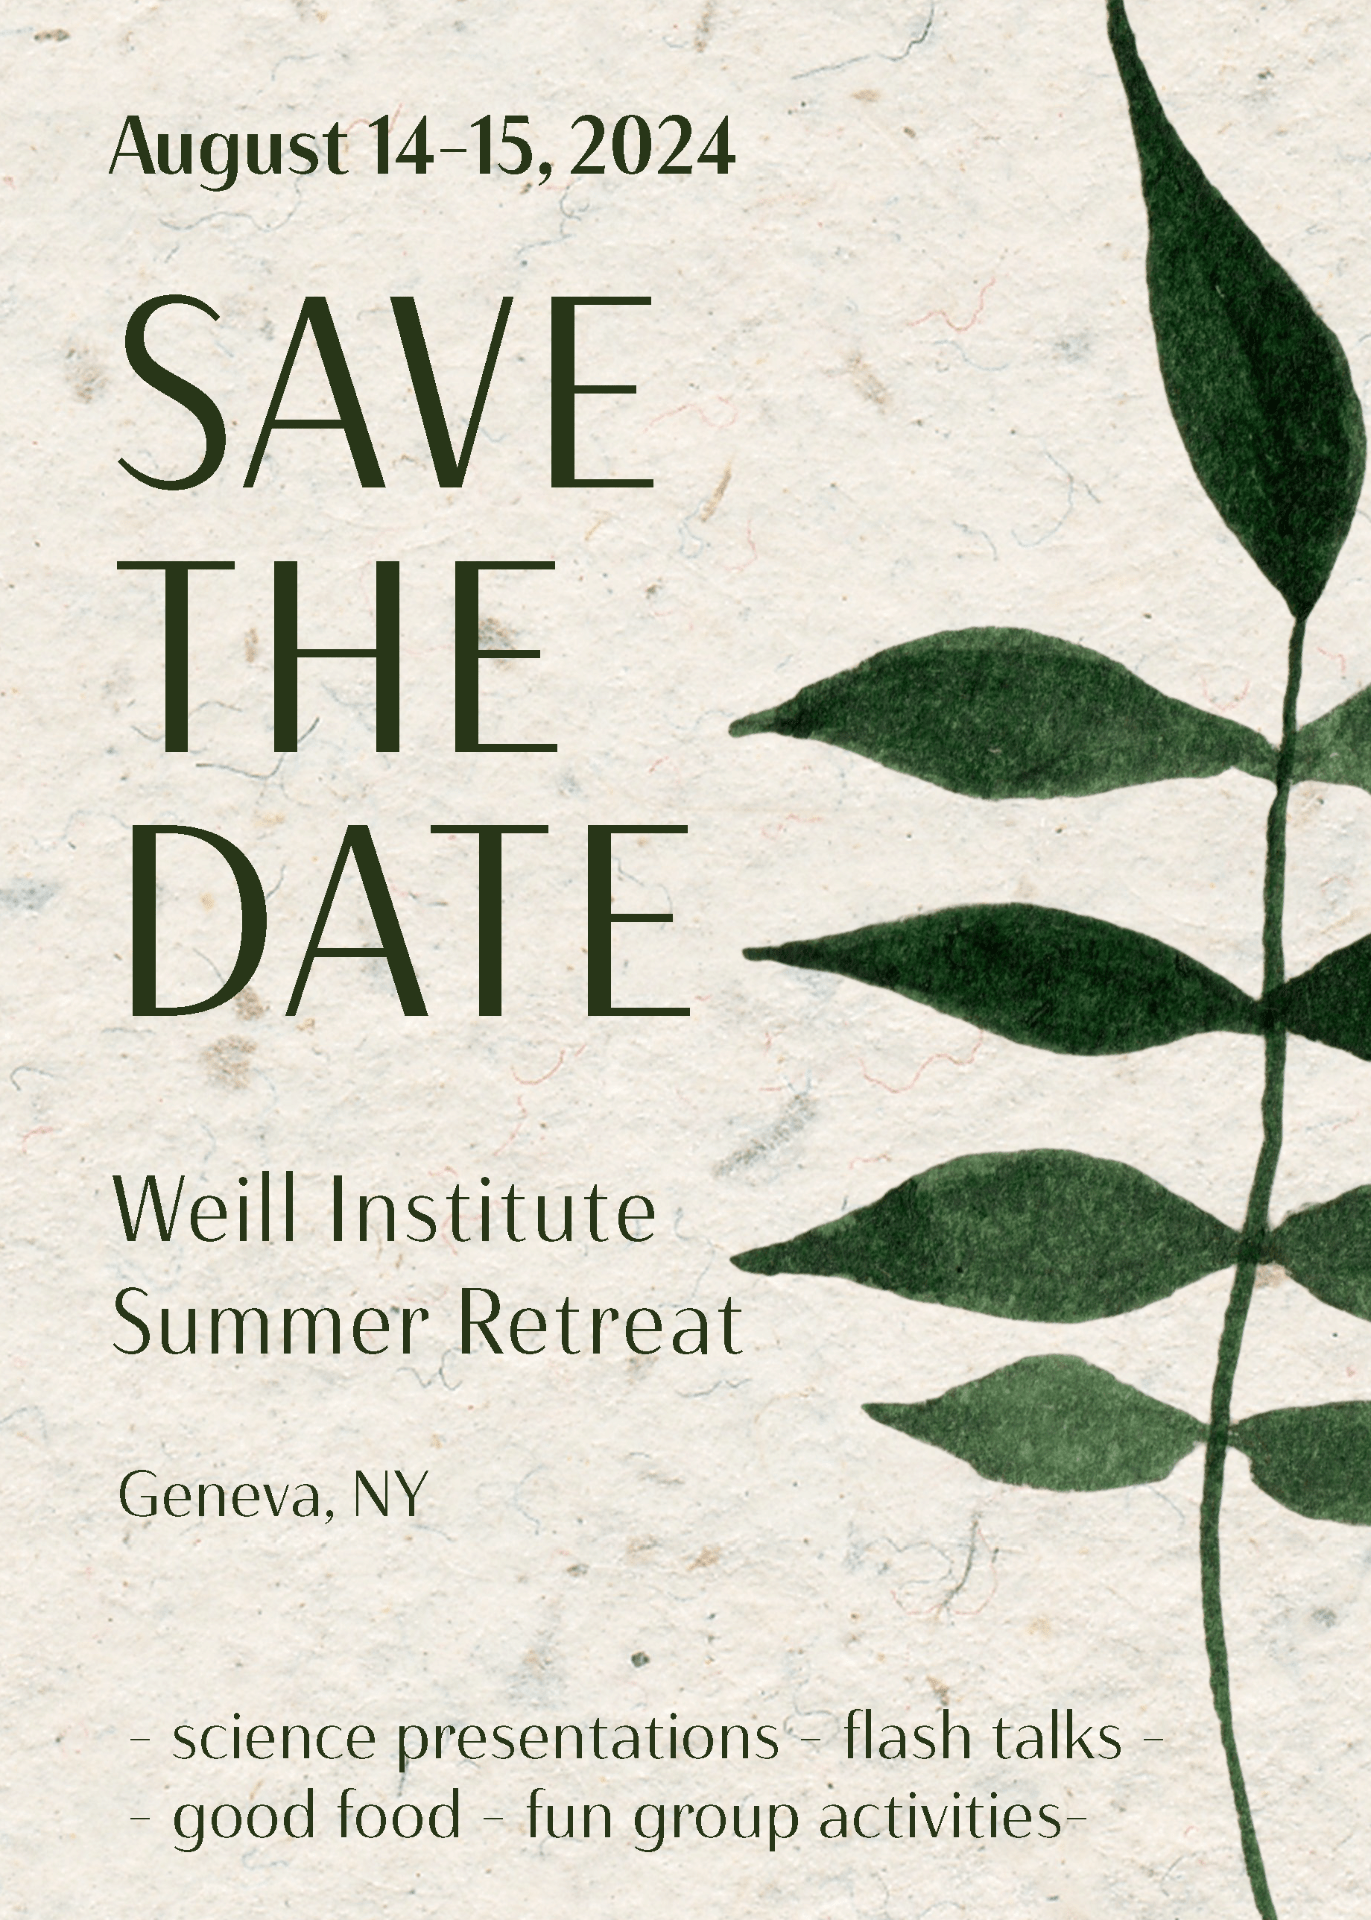 Save the Date for the  Weill Institute Summer Retreat: August 14-15, 2024